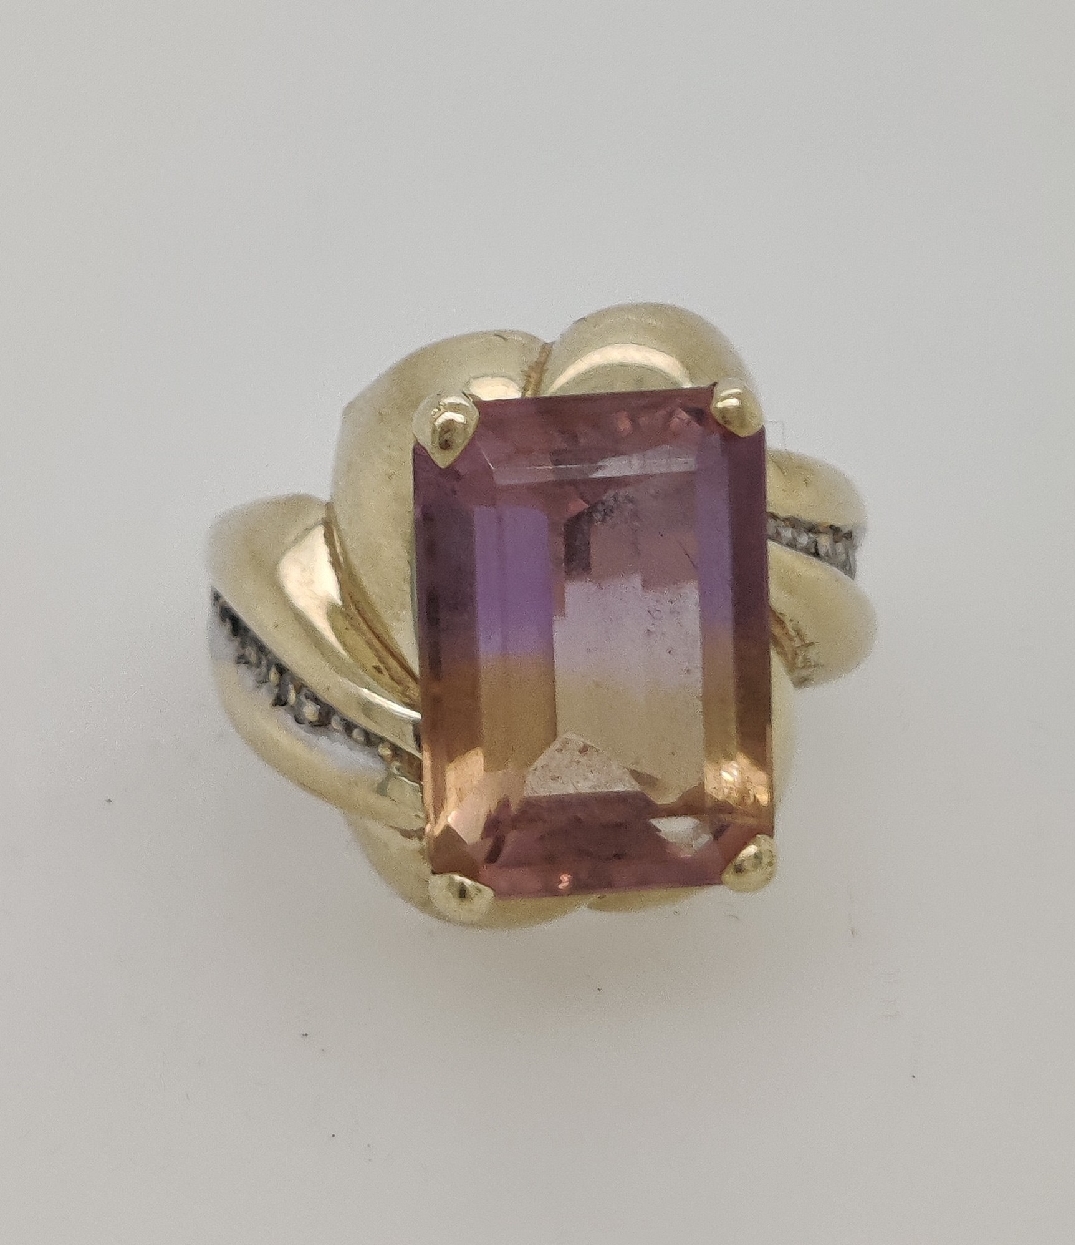 10K Yellow Gold Ring with Emerald Cut Ametrine Size 7